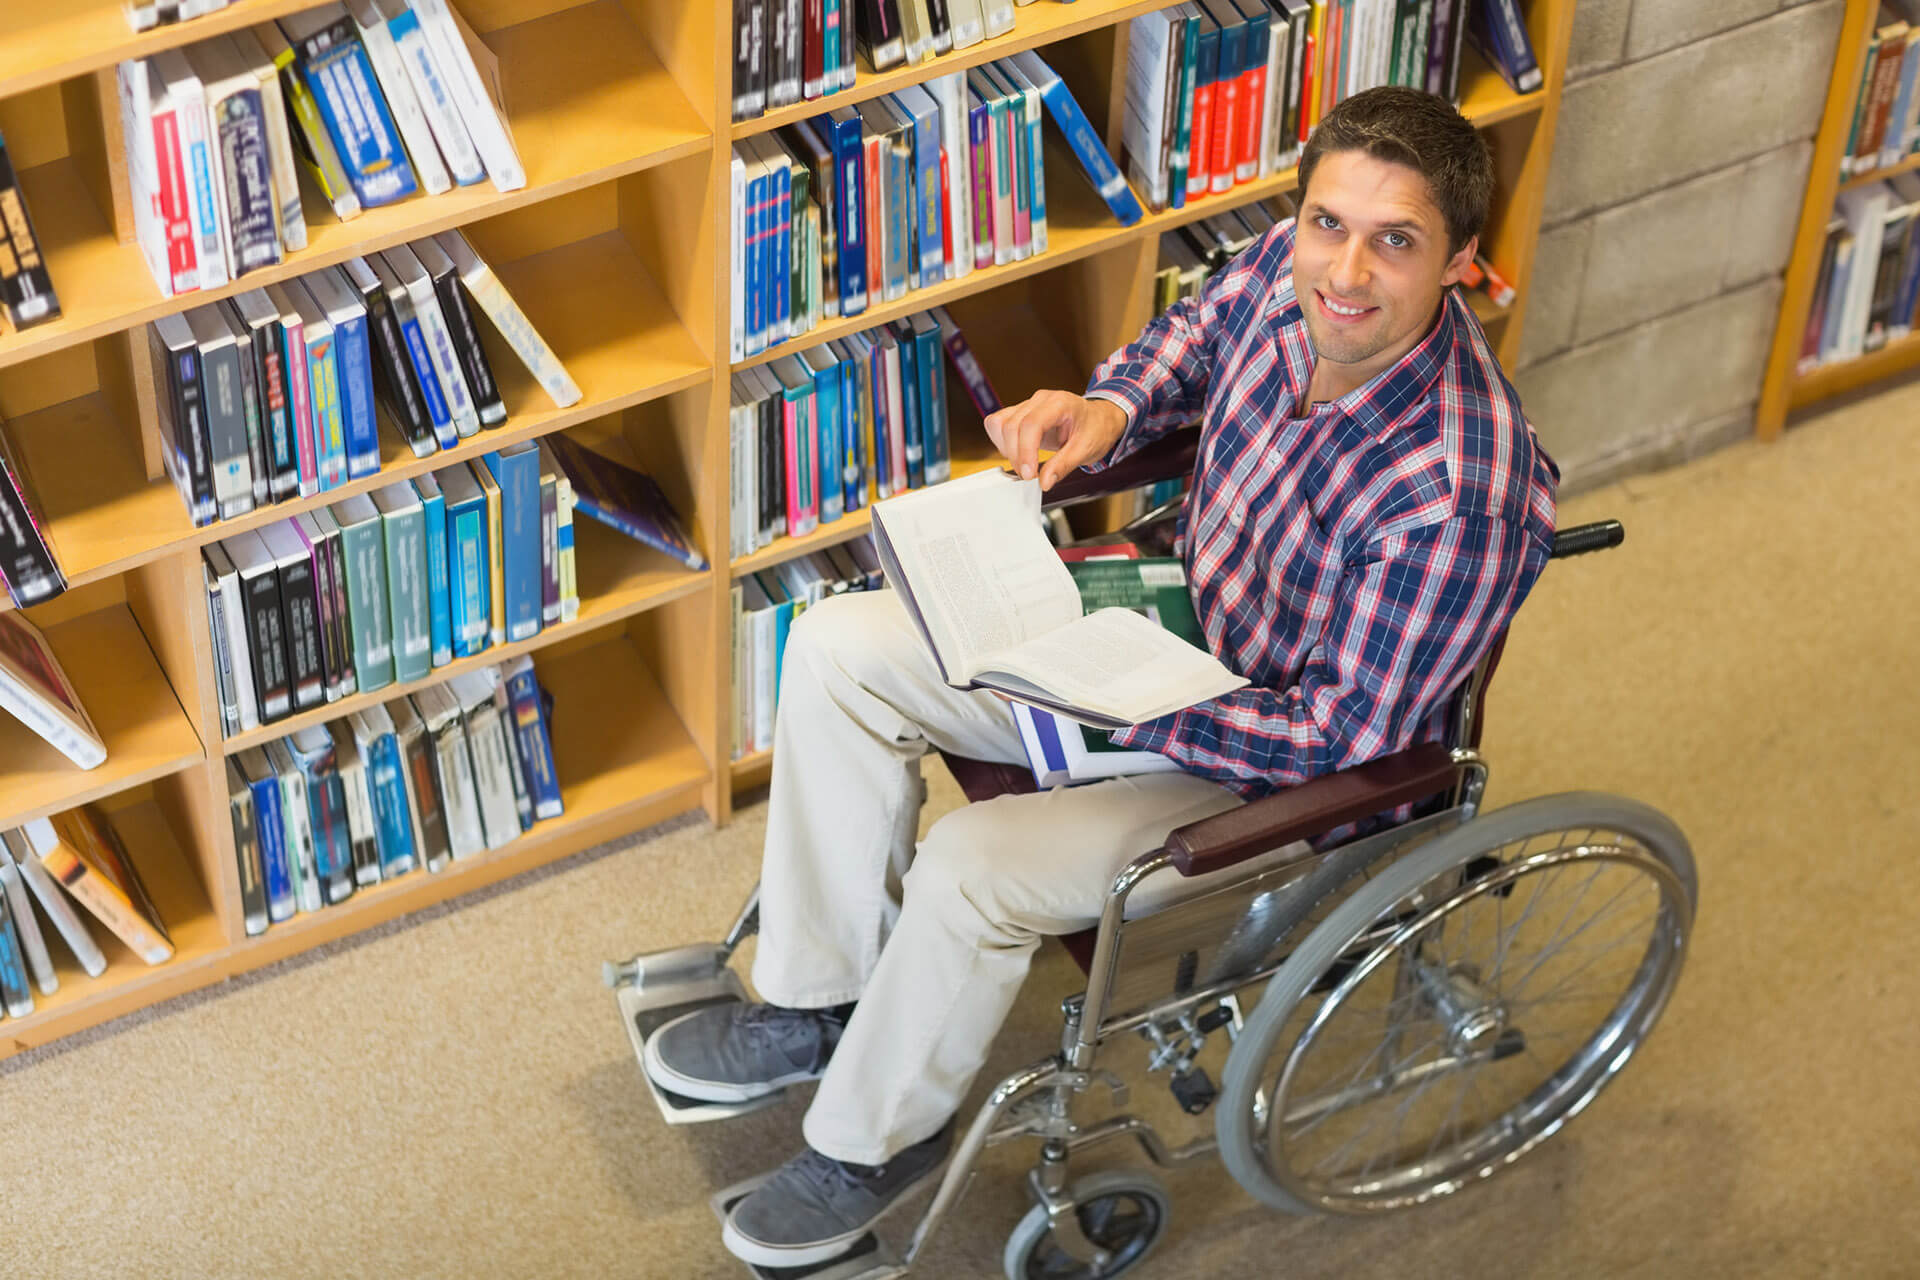 A man using a wheelchair browses books in a library